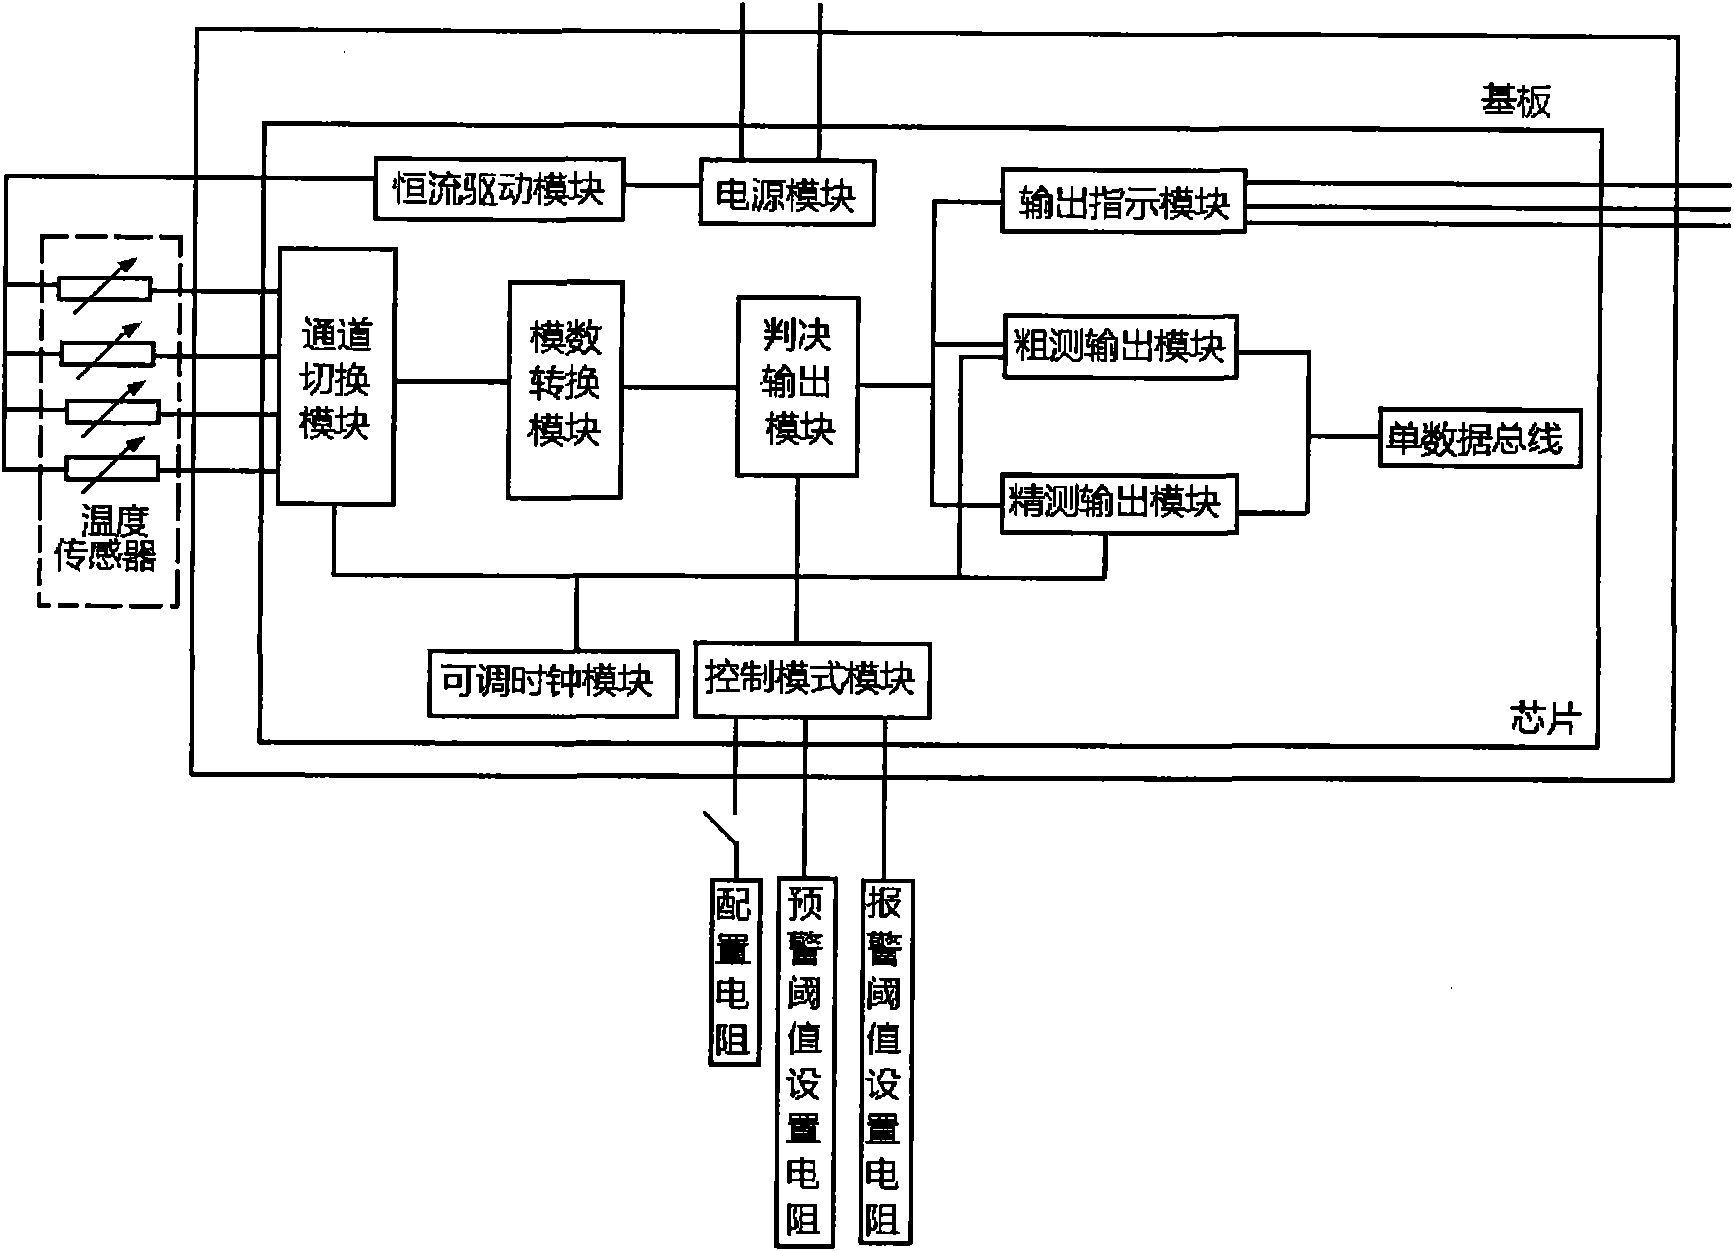 Single-bus temperature acquisition system integrated chip